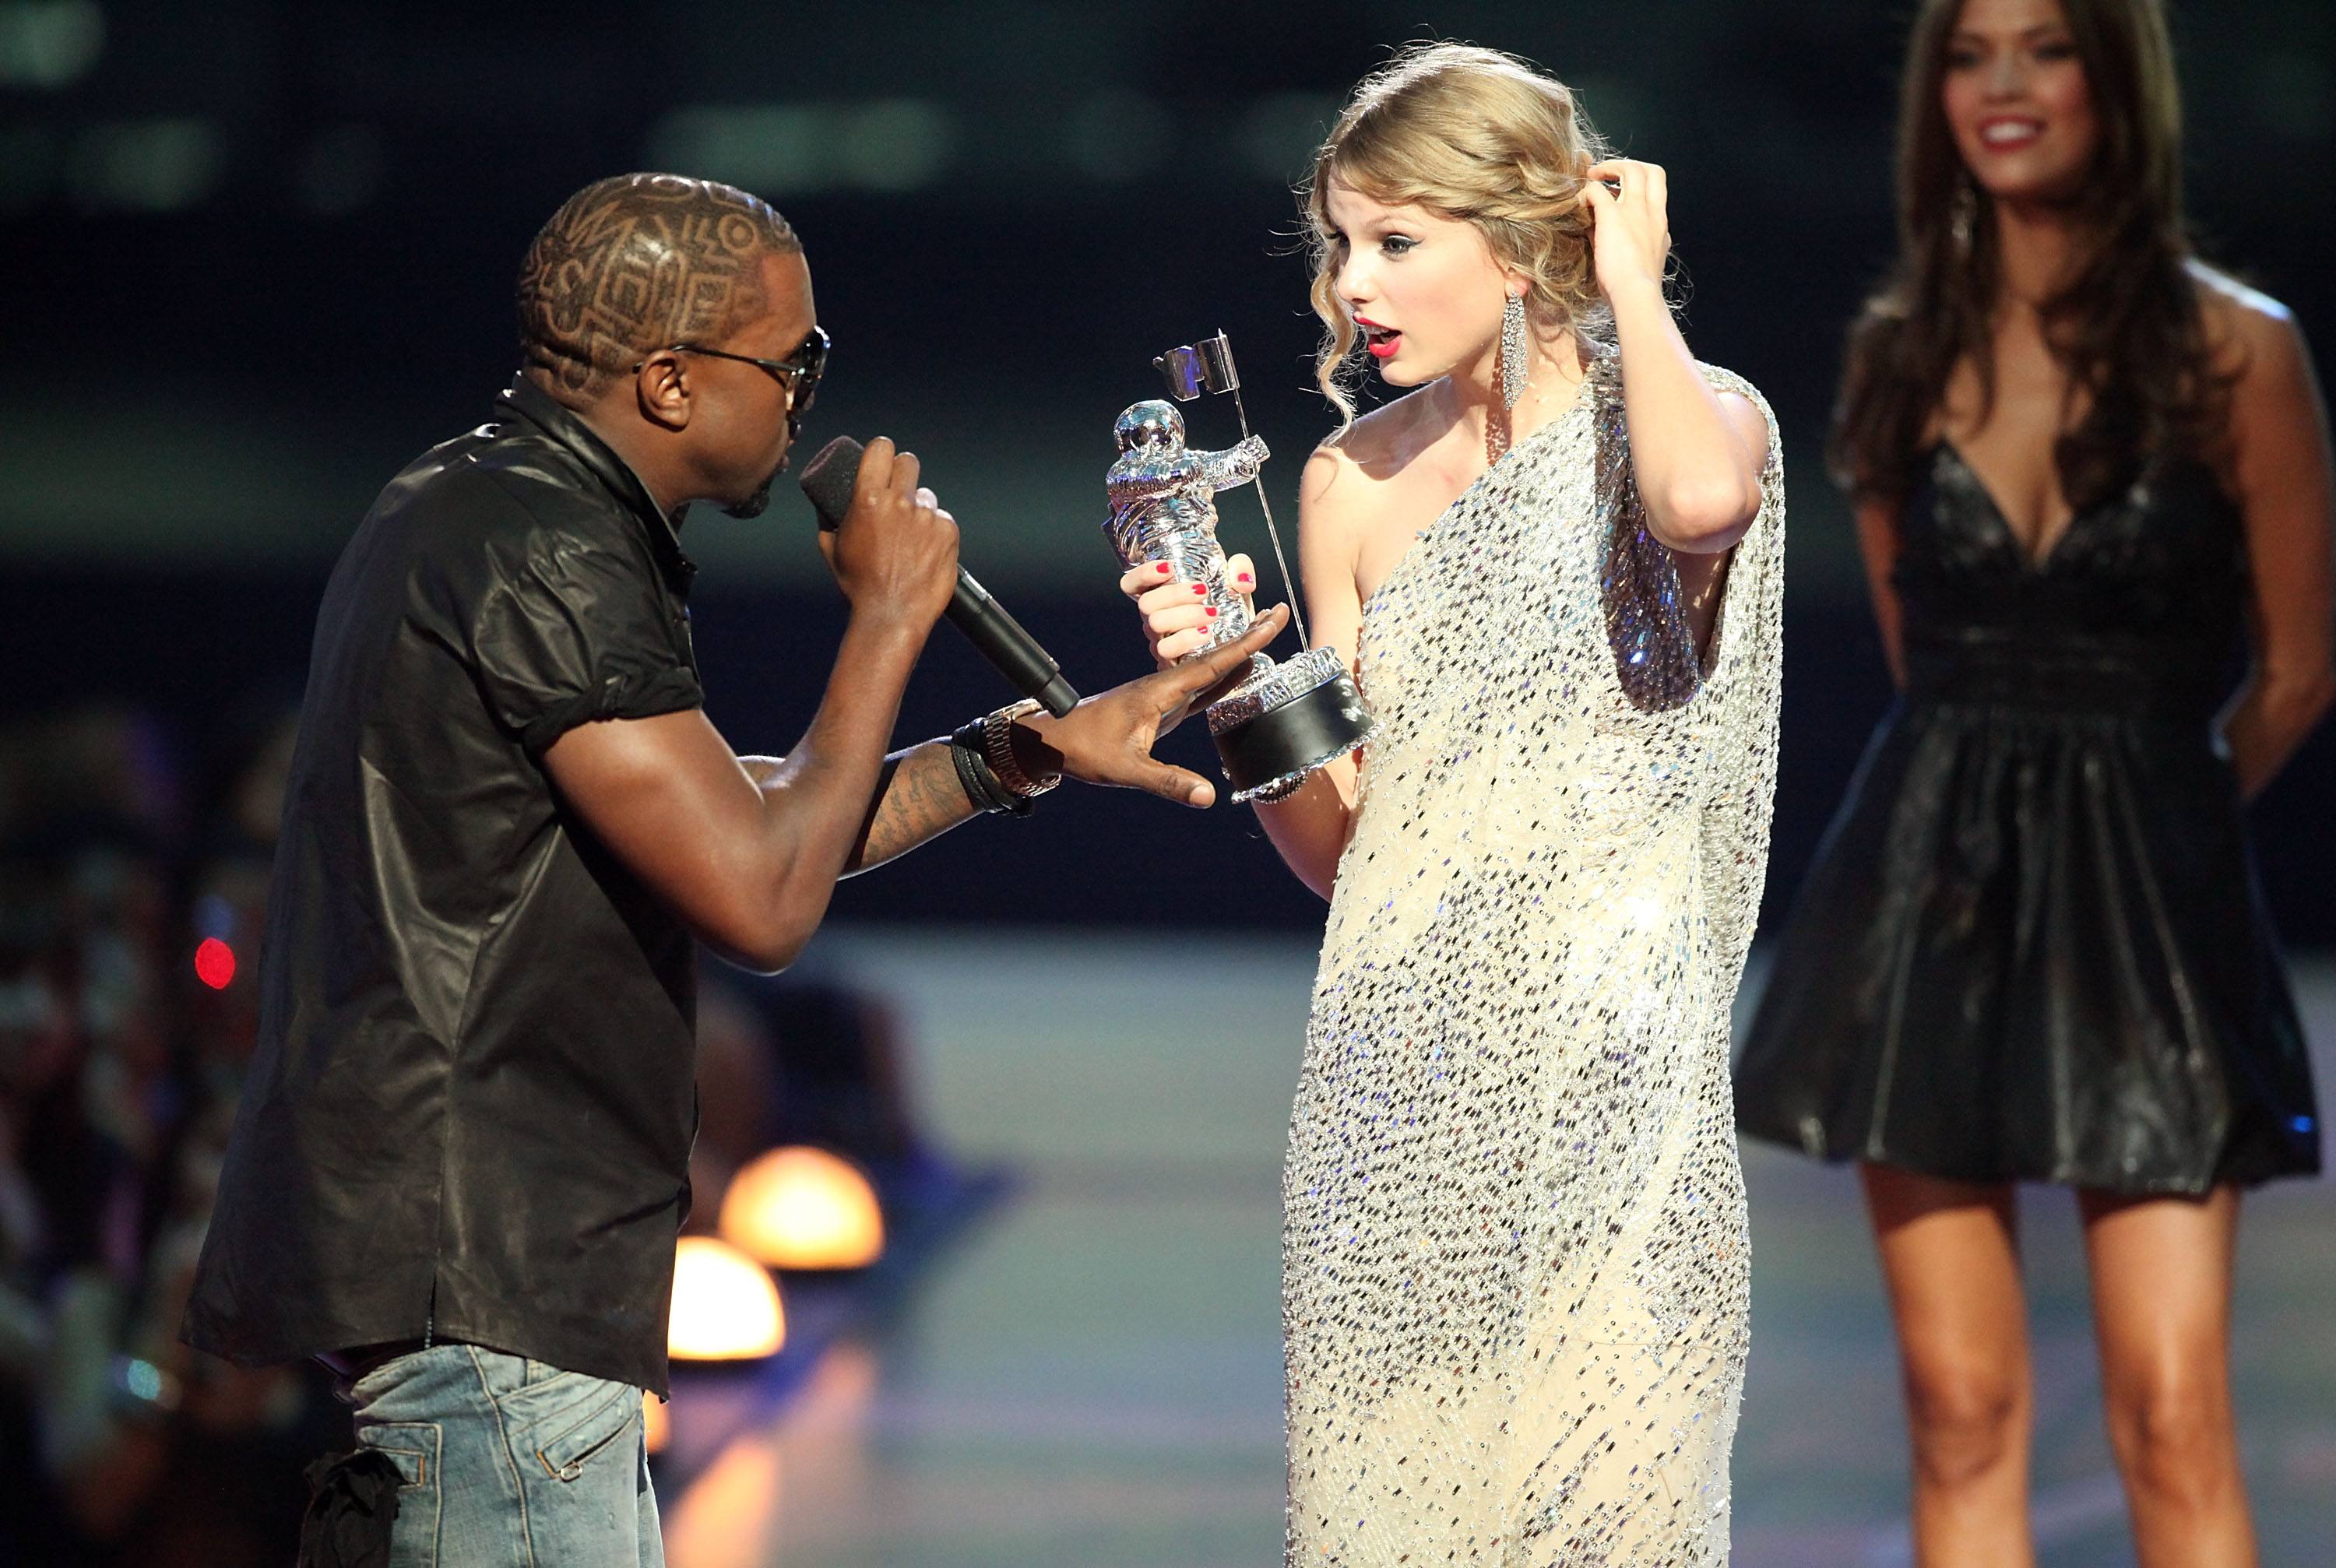 Kanye West and Taylor Swift on stage at the VMAs. 